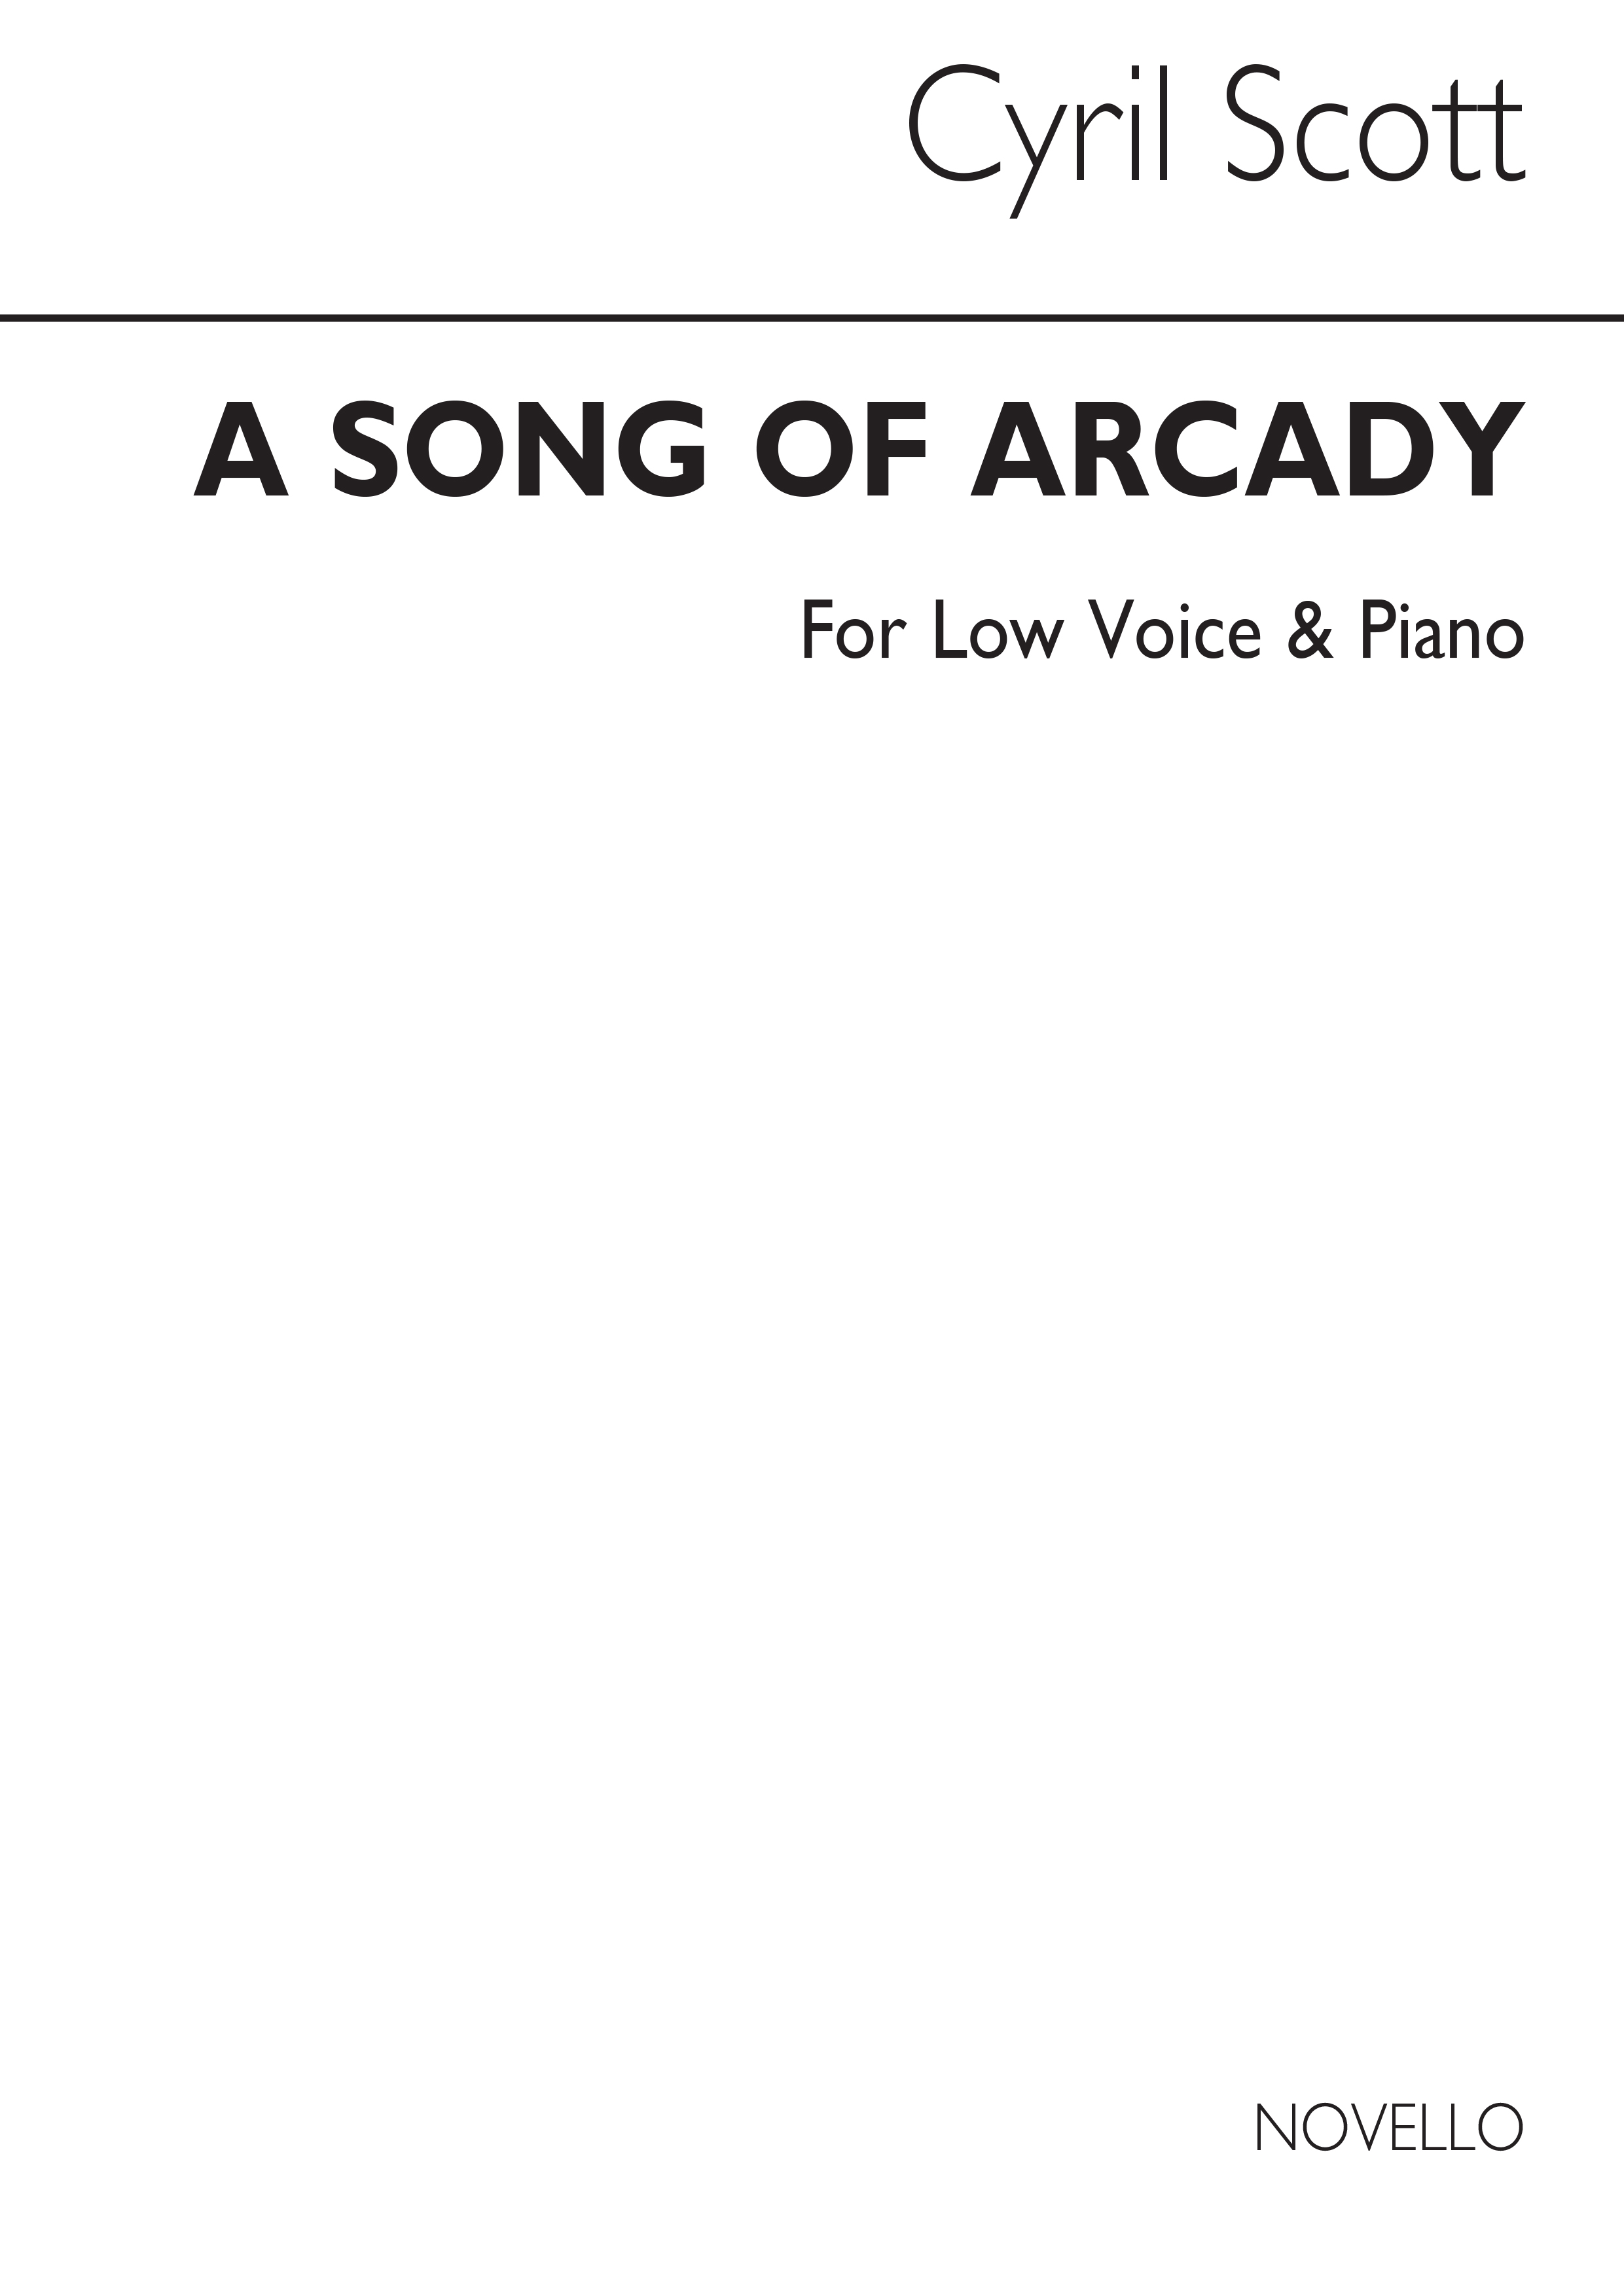 Cyril Scott: A Song Of Arcady-low Voice/Piano (Key-d): Low Voice: Vocal Work